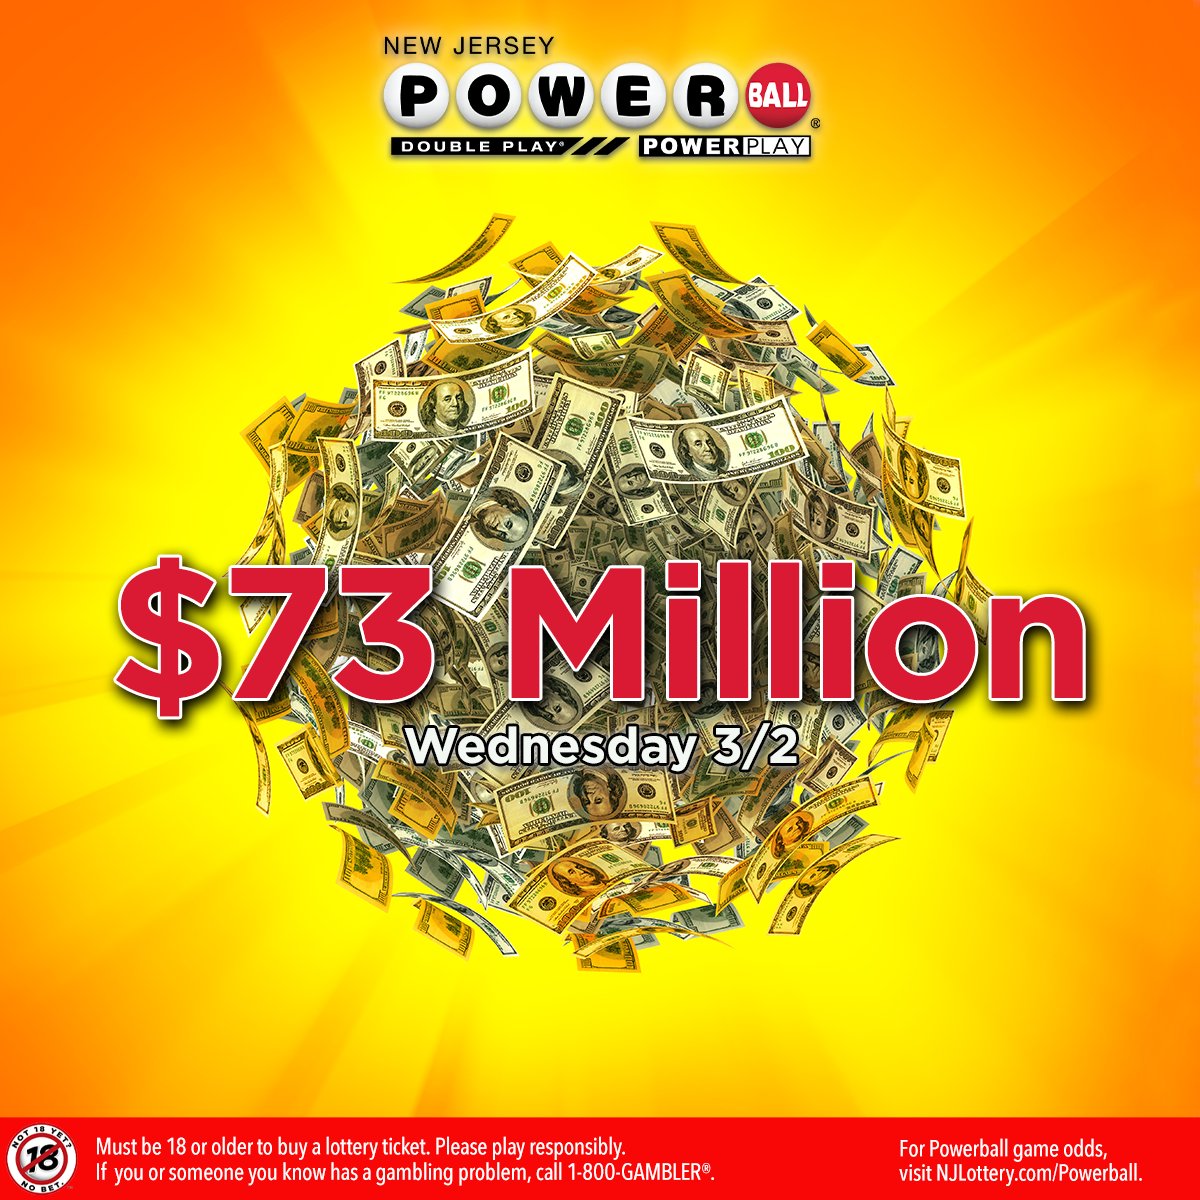 Powerball is blowing up! Don't miss out on a chance to win Wednesday's $73,000,000 #Powerball jackpot! Shoutout to the two NJ winners from Monday's 2/28 drawing! One player in North Wildwood took home $1,000,000, and another in Woodbridge won $100,000! https://t.co/eDeEH0qDOa